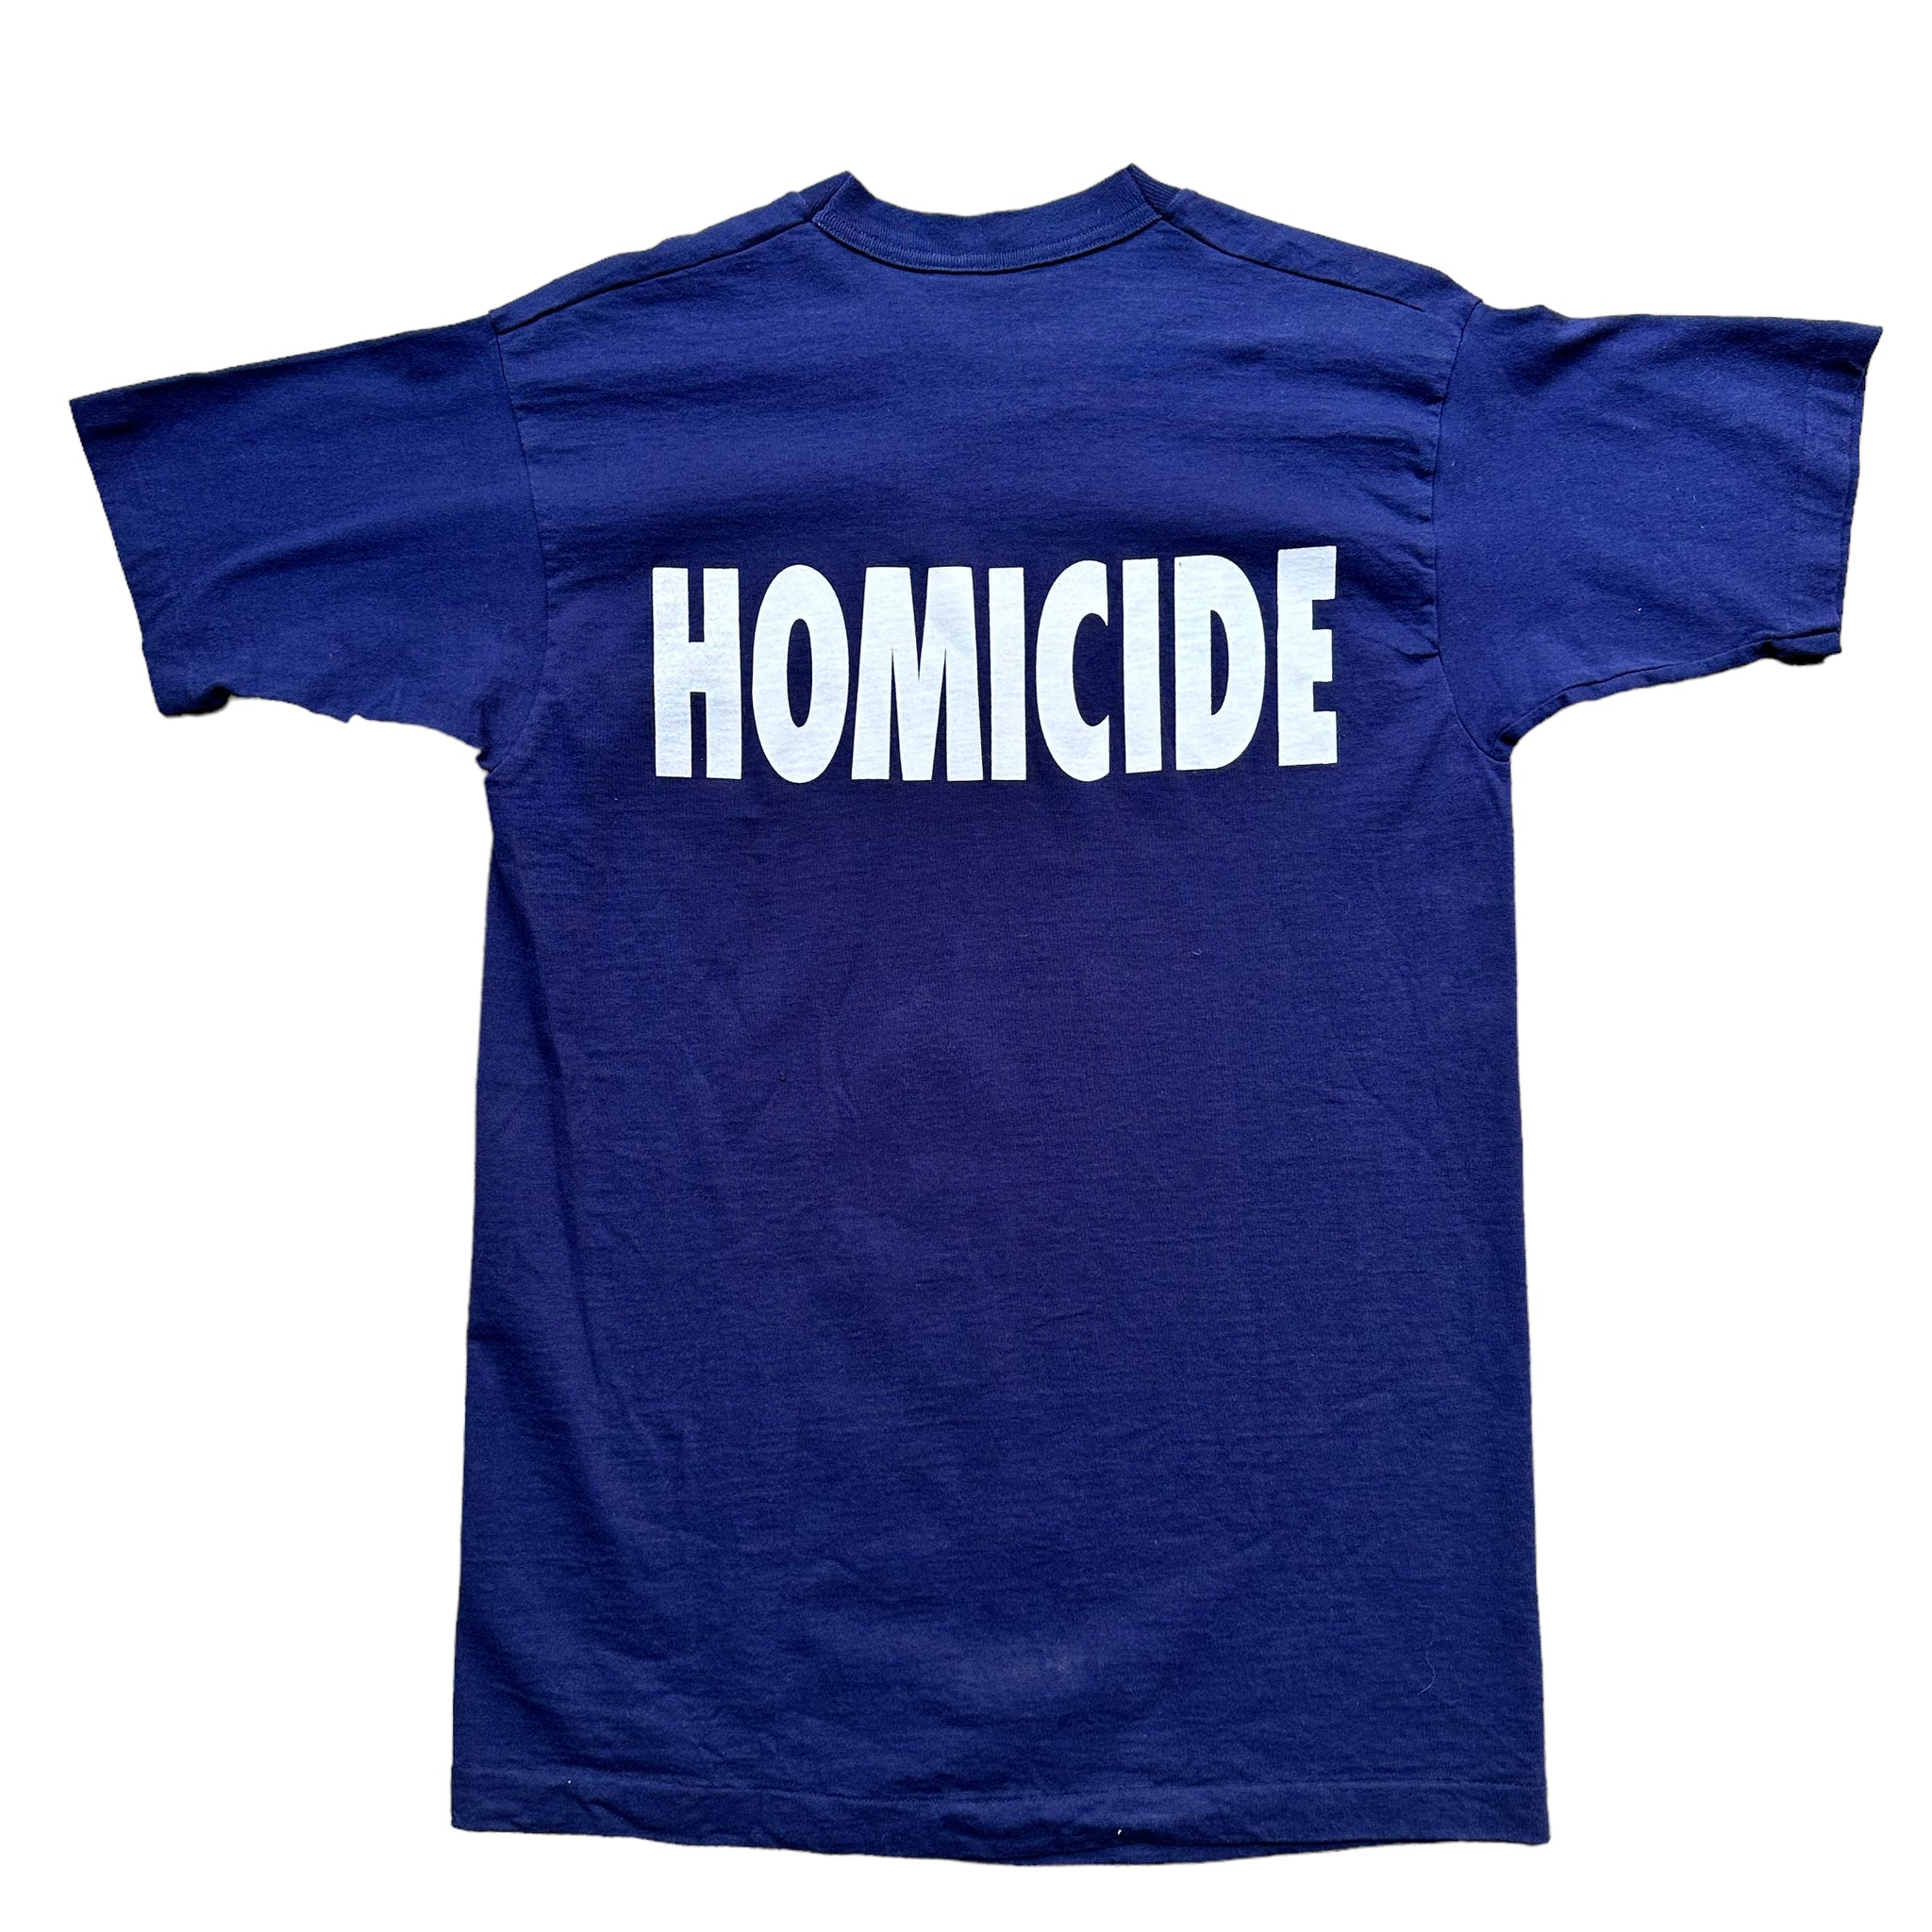 Homicide life on the street shirts